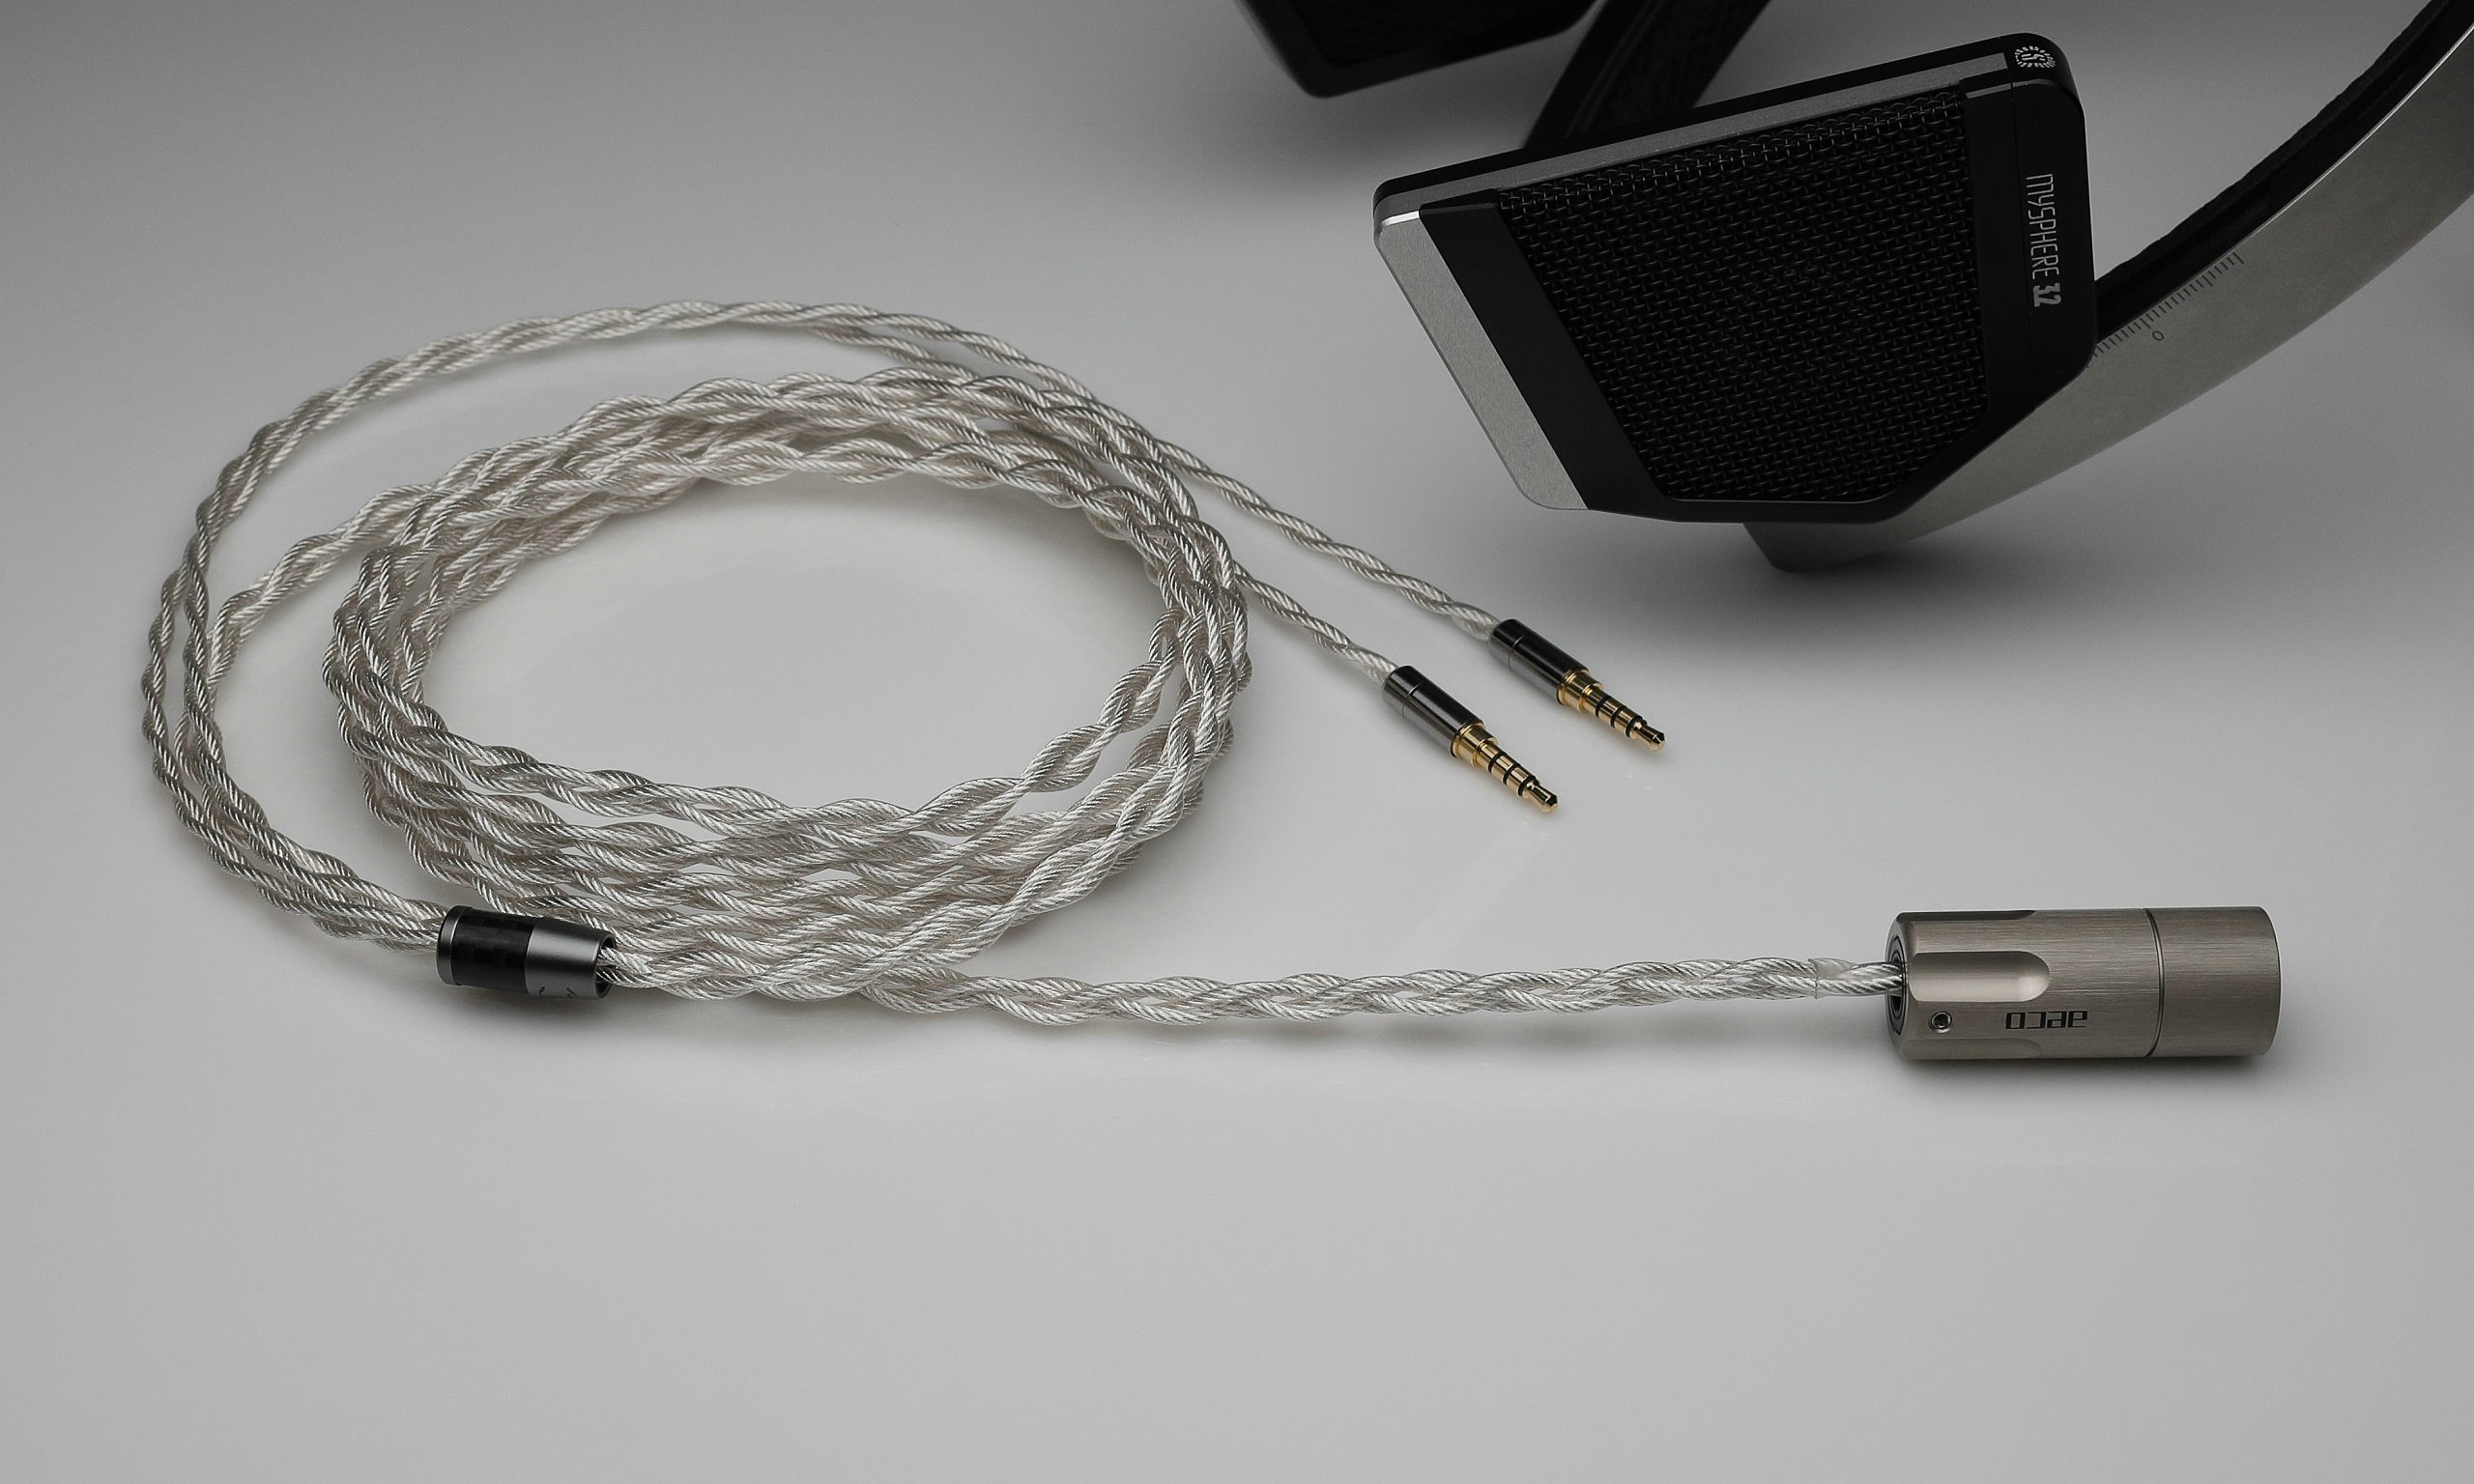 Grand aw20 MySpehere 3 upgrade cable